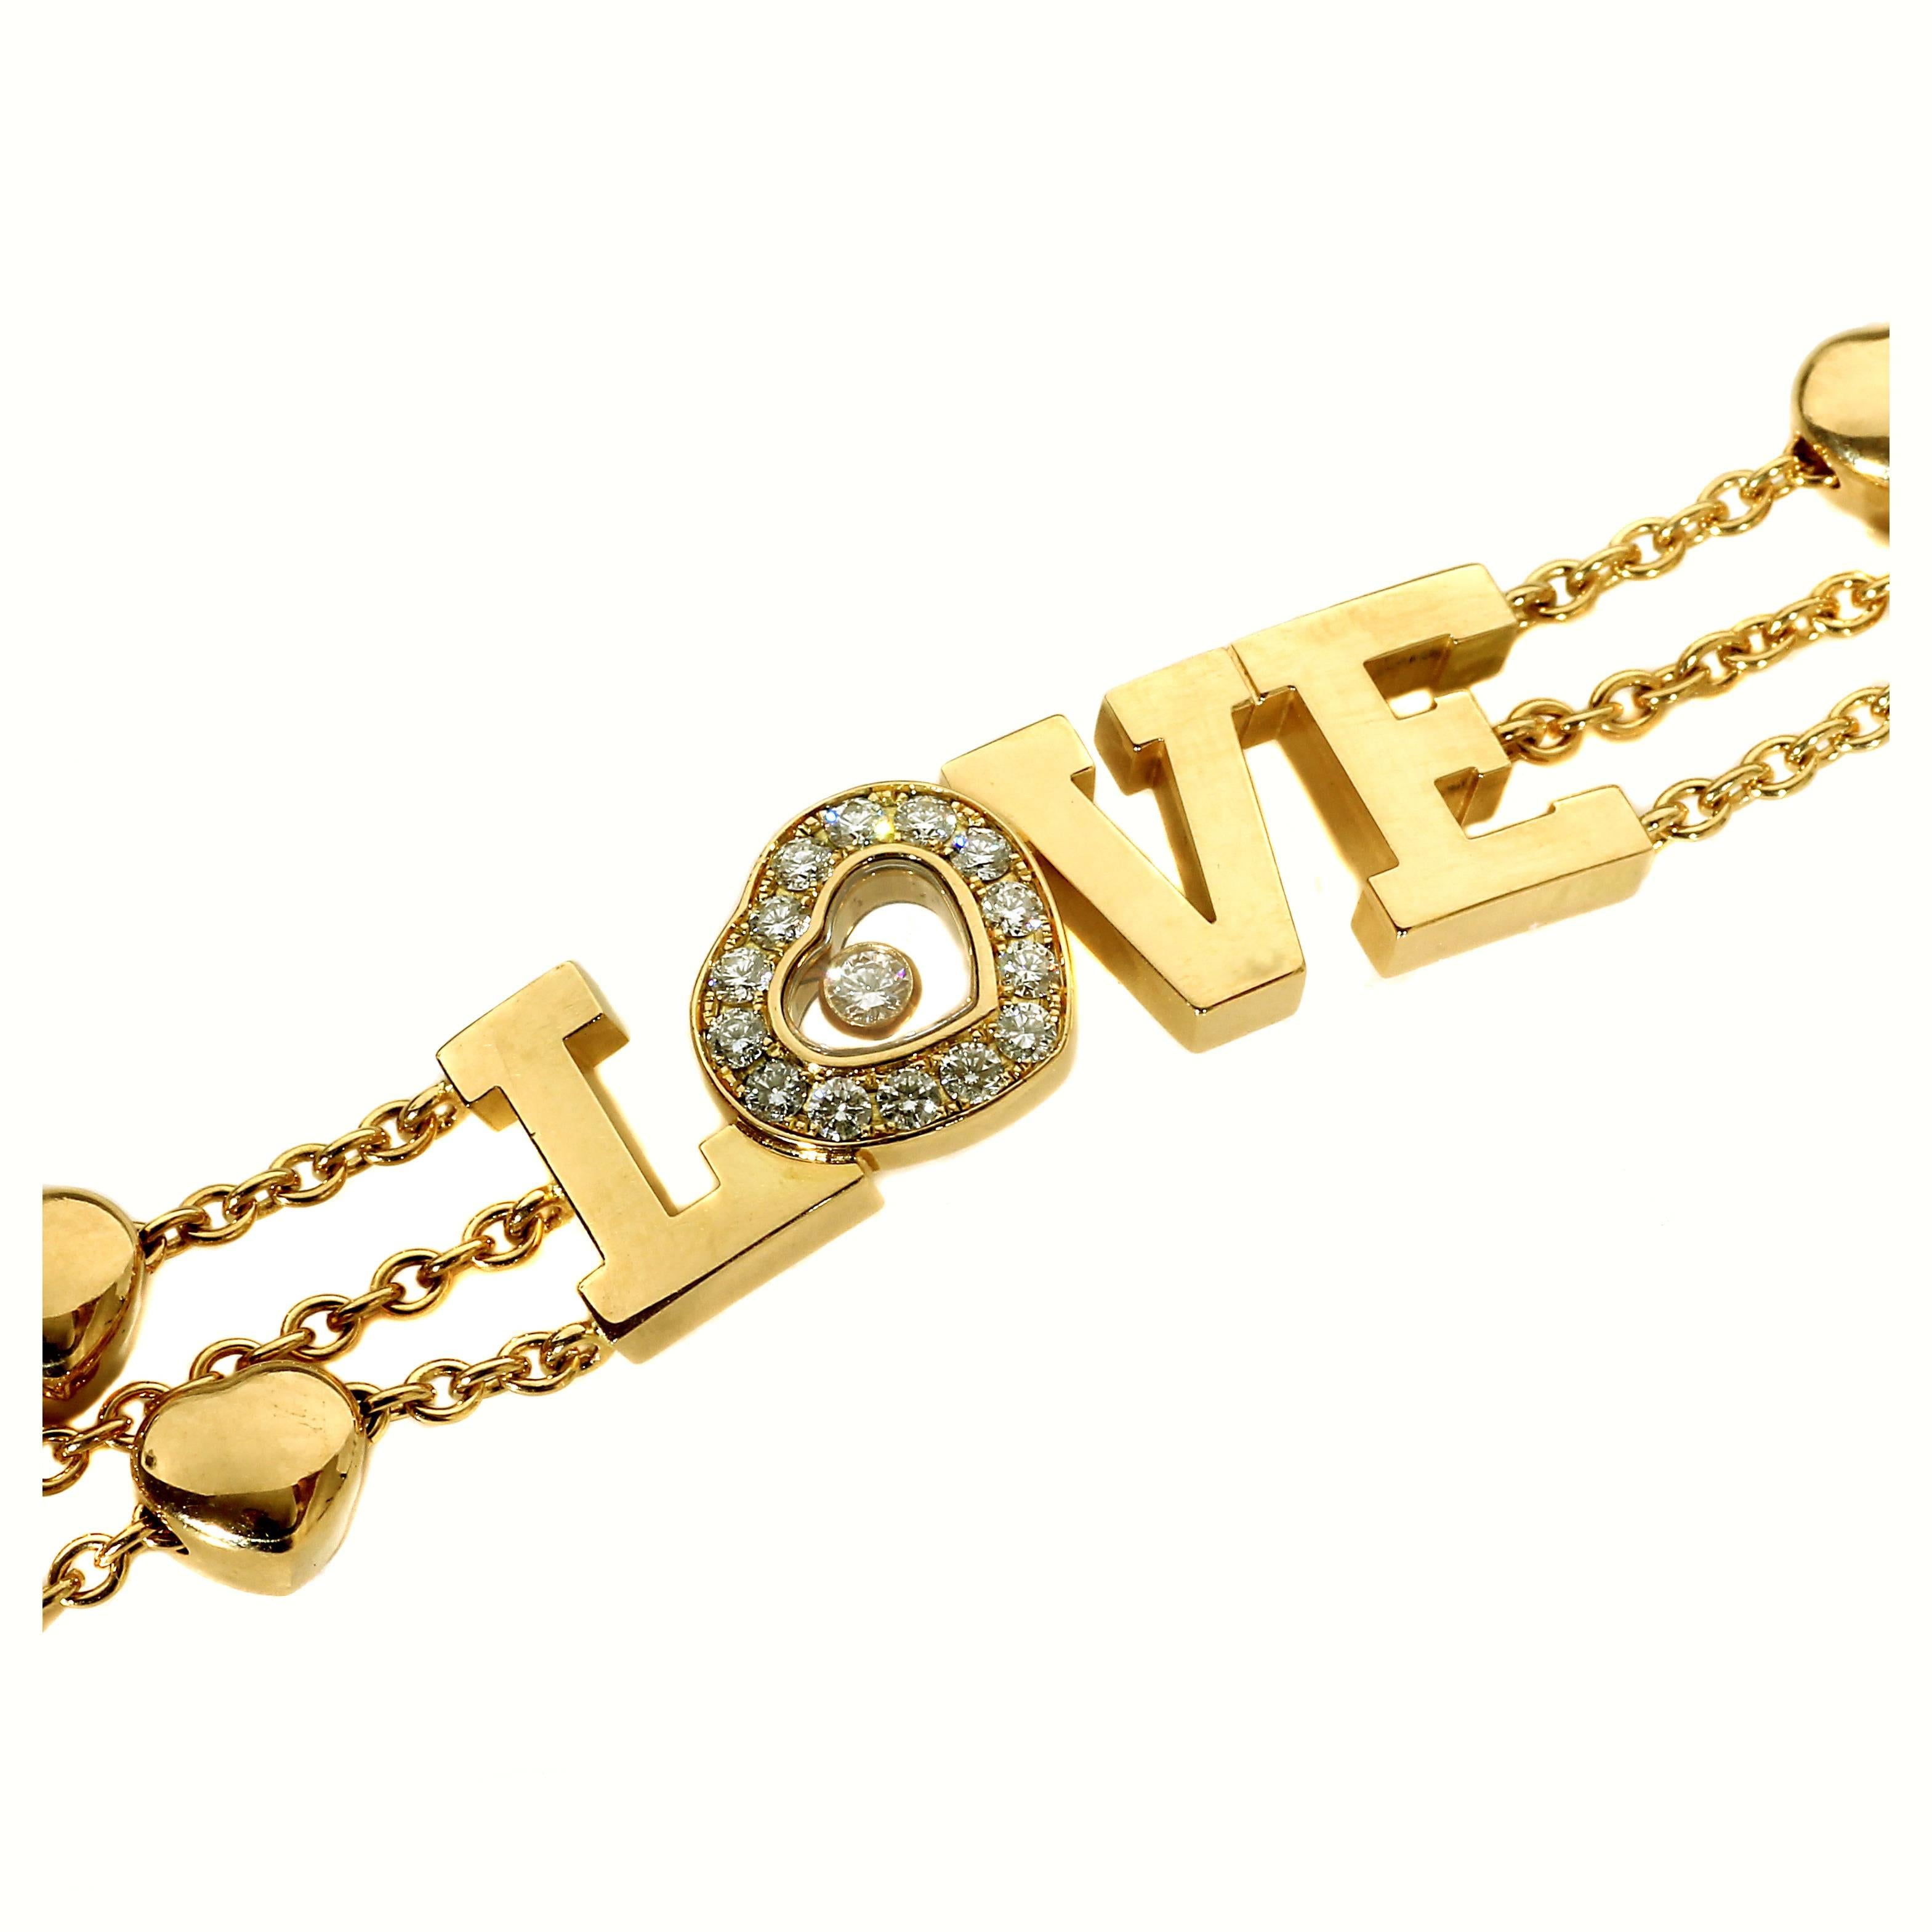 From Chopard’s popular Happy Diamonds collection, this delightful 18k yellow gold piece has “love” written all over it with 15 Round Brilliant Cut Diamonds embedded into the letter O, which is shaped like a heart.

Length: 6 1/2″
Dimensions: The